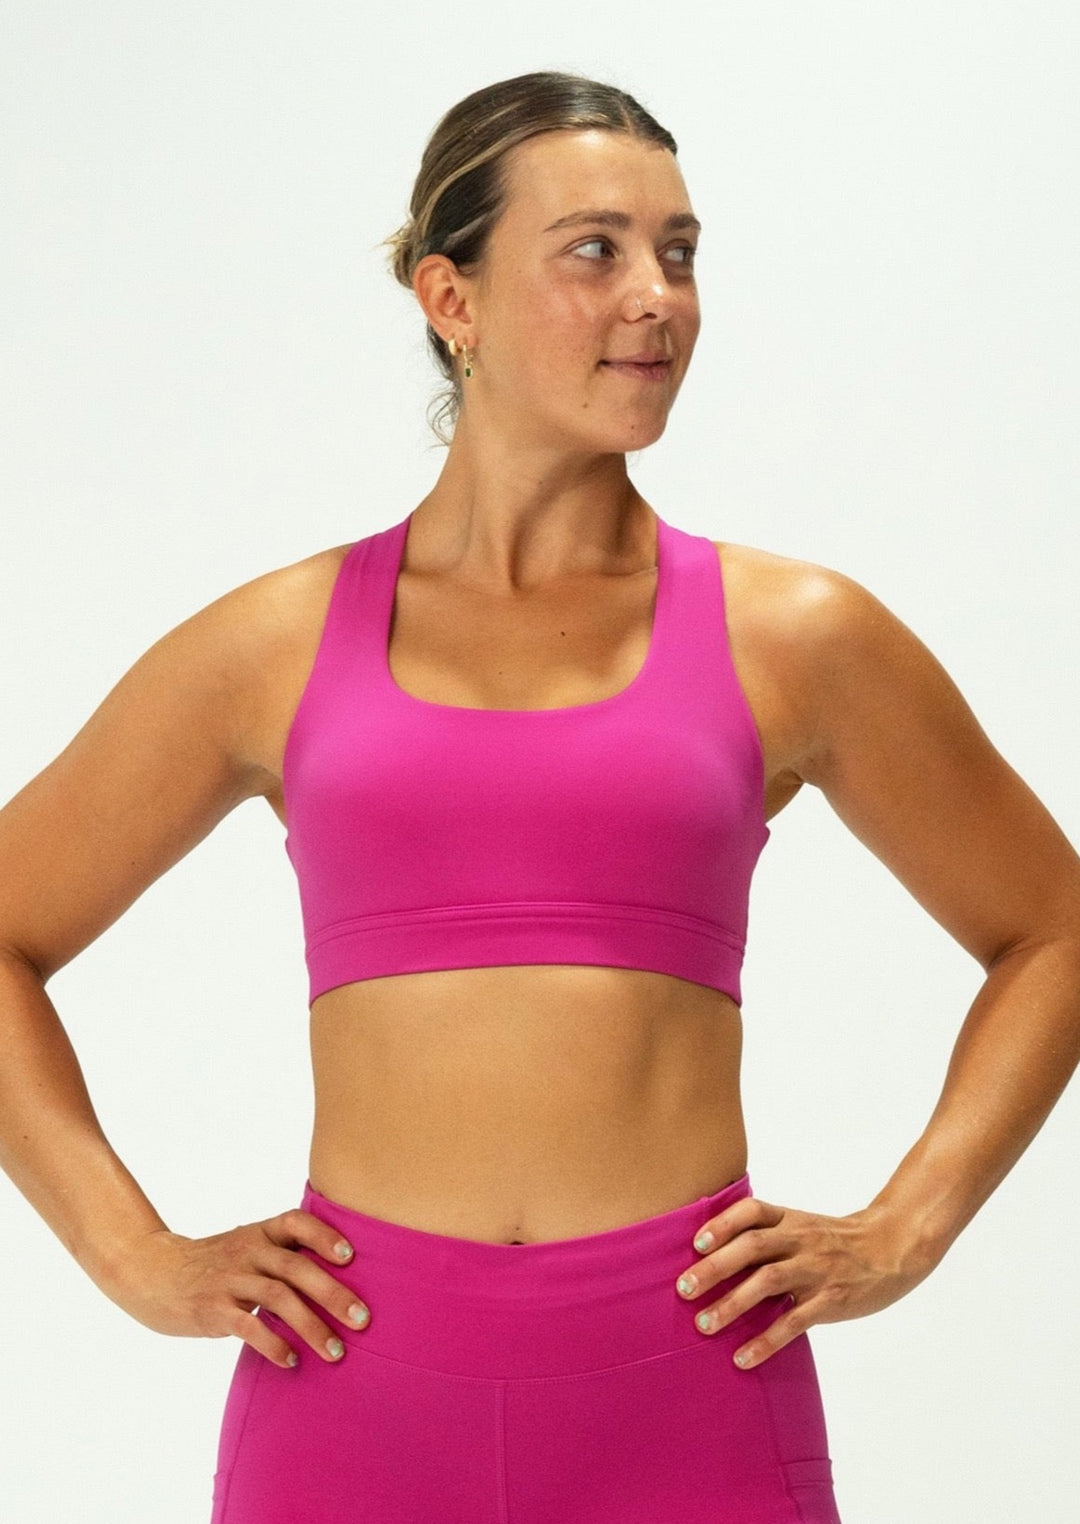 The SF ELITE CROP TOP is designed with cross-over back straps complementing the curve of your shoulder blades and allowing your arms to move freely while offering maximum support. This crop top is supportive, functional, and looks amazing on; the perfect crop top for any running session.